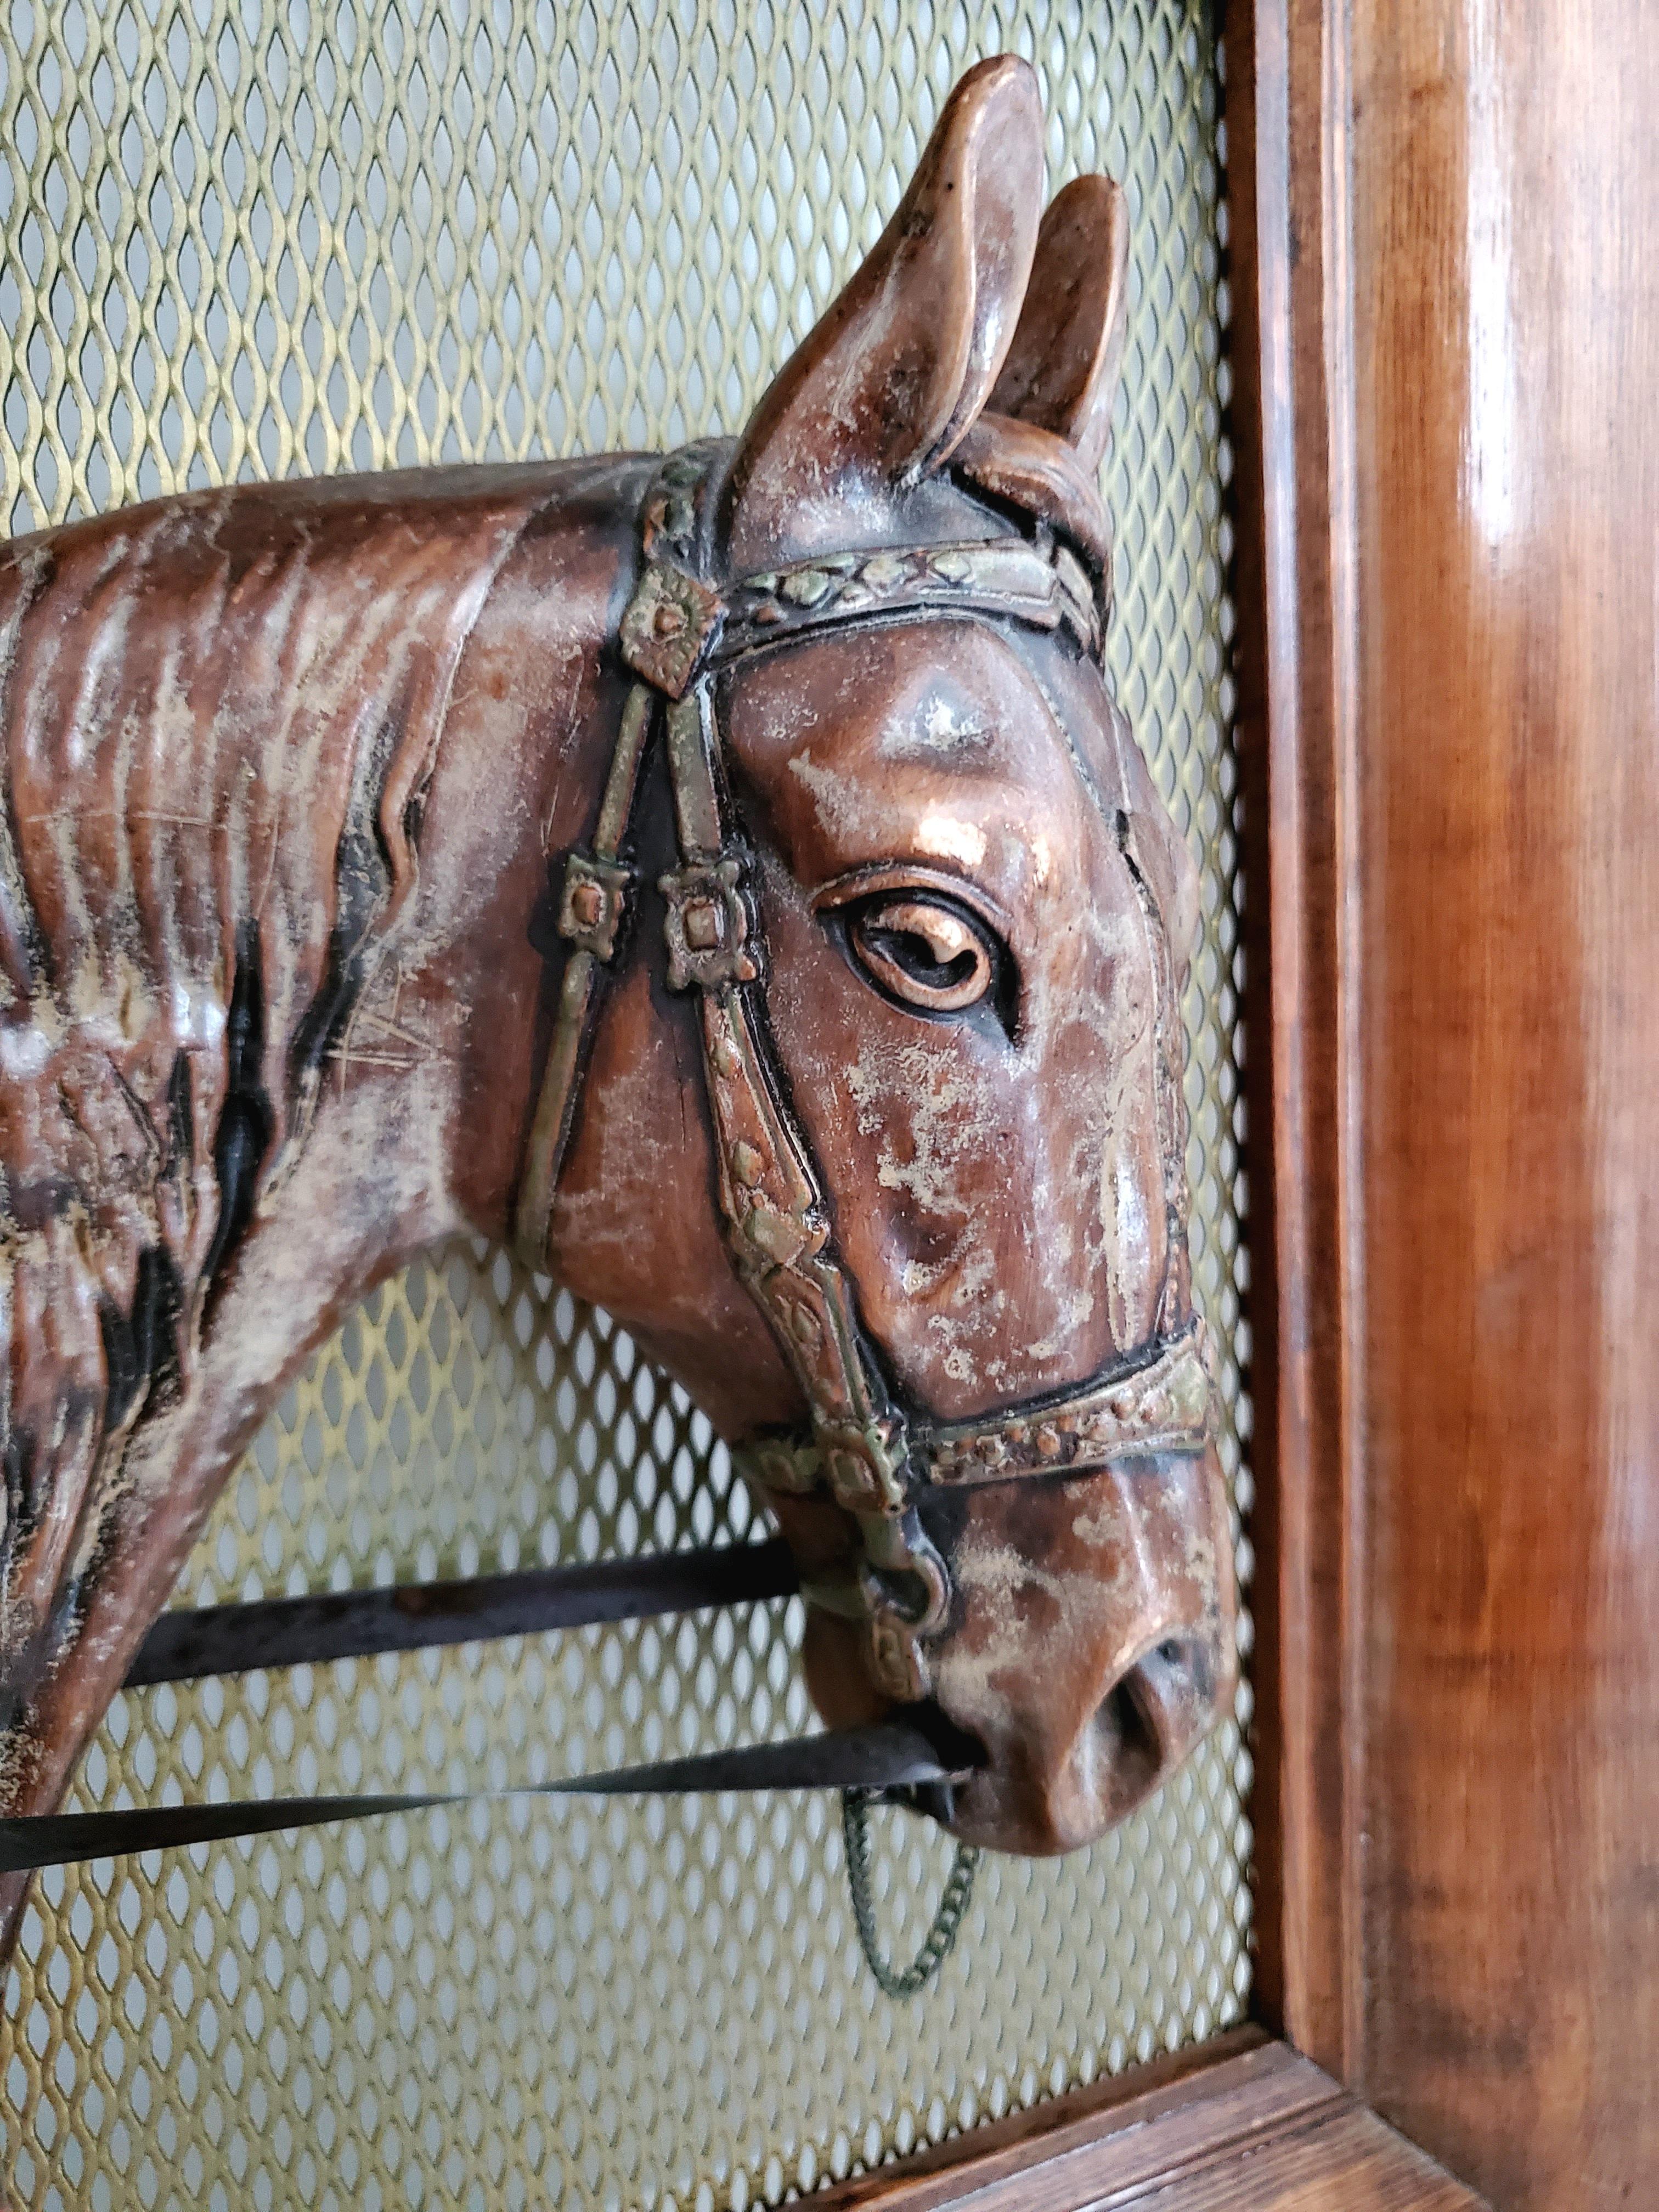 This would be the perfect Valentine's Day gift for the equestrian or horse lover.

This antique horse sculpture is a unique and spectacular equestrian piece. The horse sculpture is molded from copper and is mounted and framed. This framed scupltural